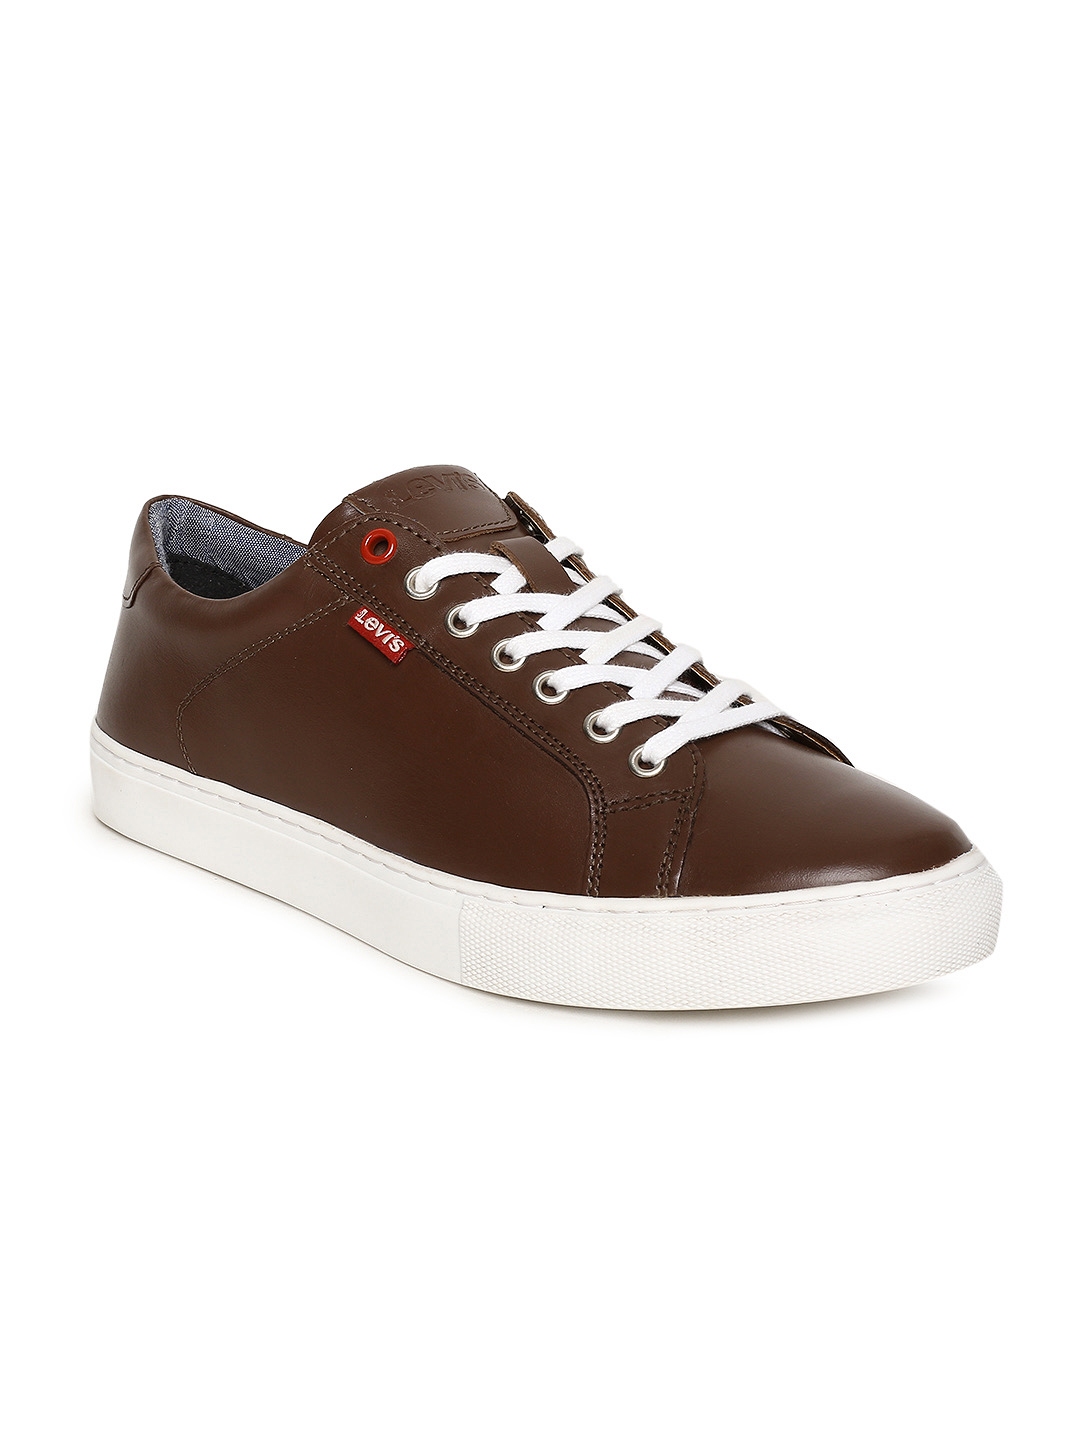 Buy Levis Men Brown Prellude Sneakers - Casual Shoes for Men 2406301 |  Myntra